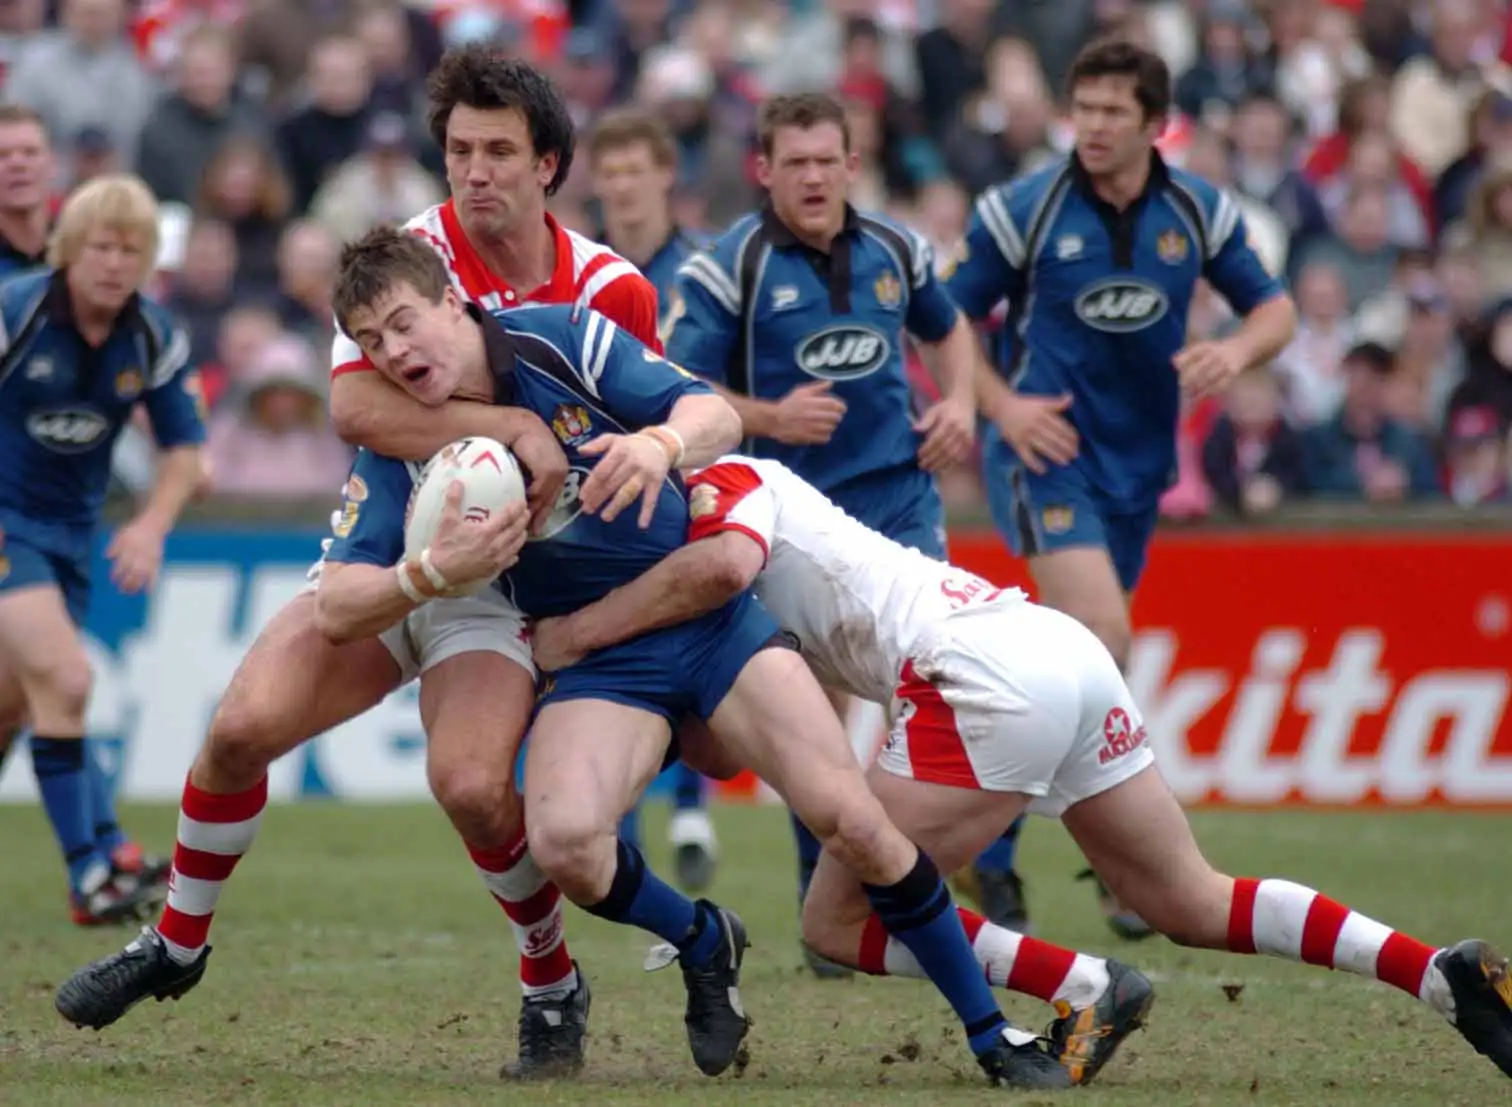 Throwback: The 2004 Good Friday brawl between St Helens and Wigan